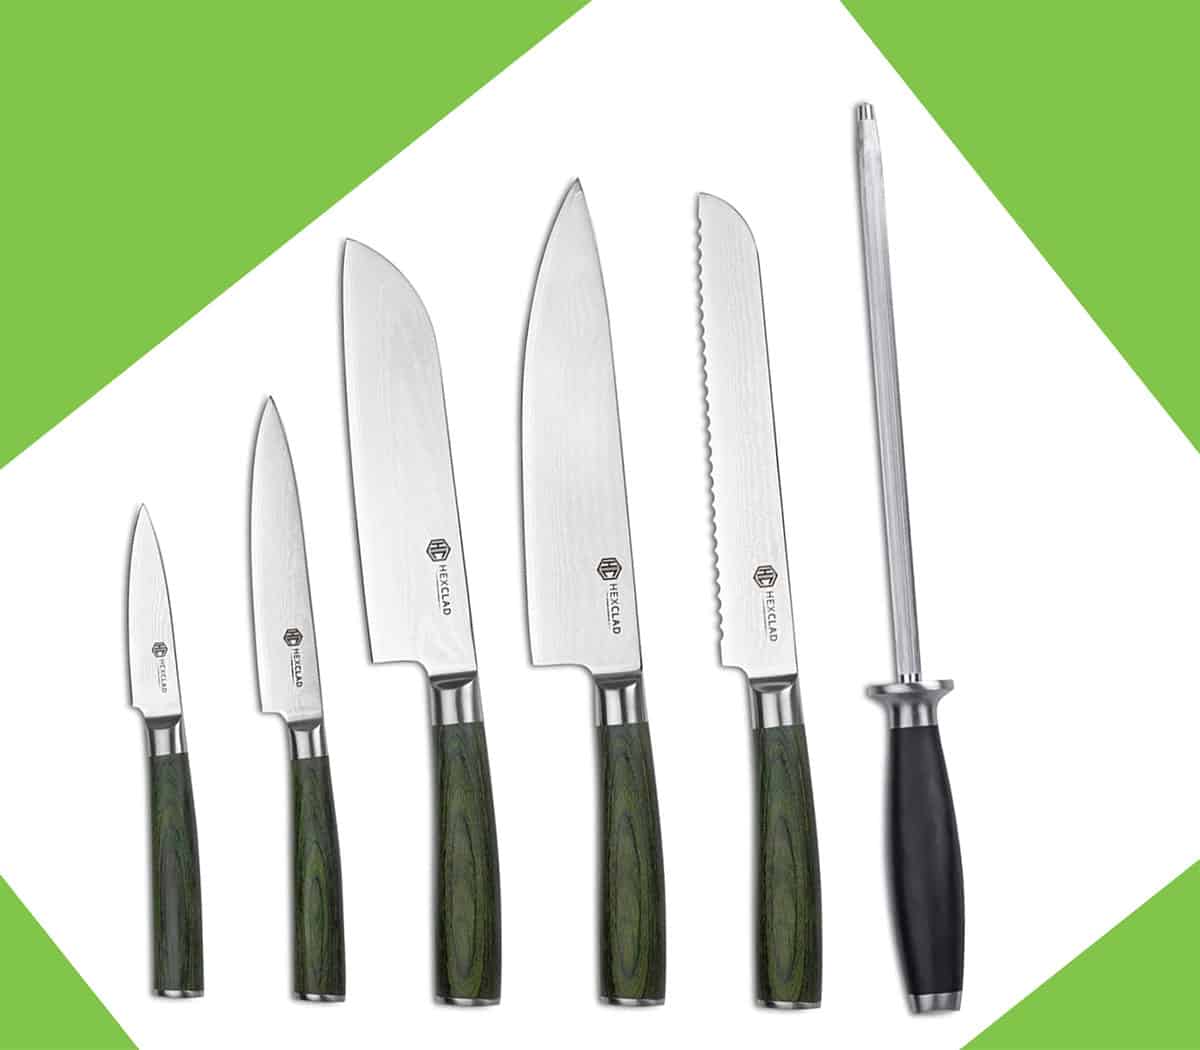 hexclad knife set review